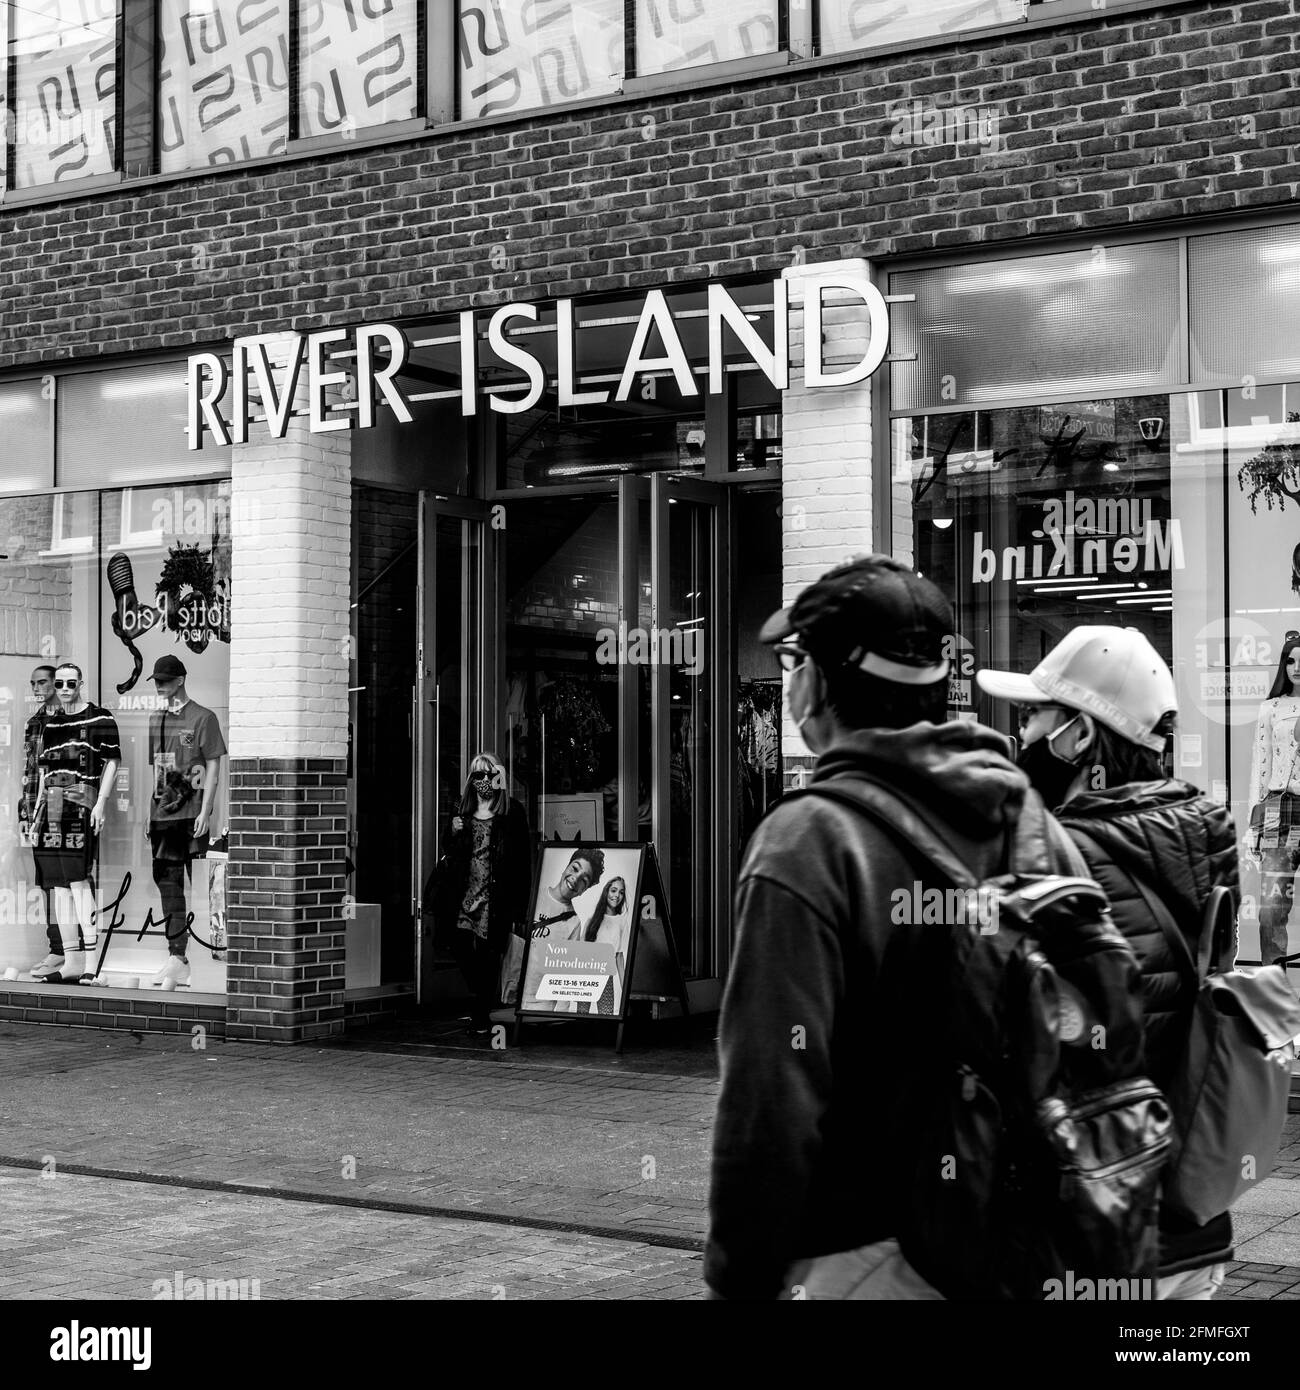 Kingston Upon Thames London, May 07 2021, Two People Or Shoppers Walking Past A River Island Fashion Retail Shop Front Stock Photo